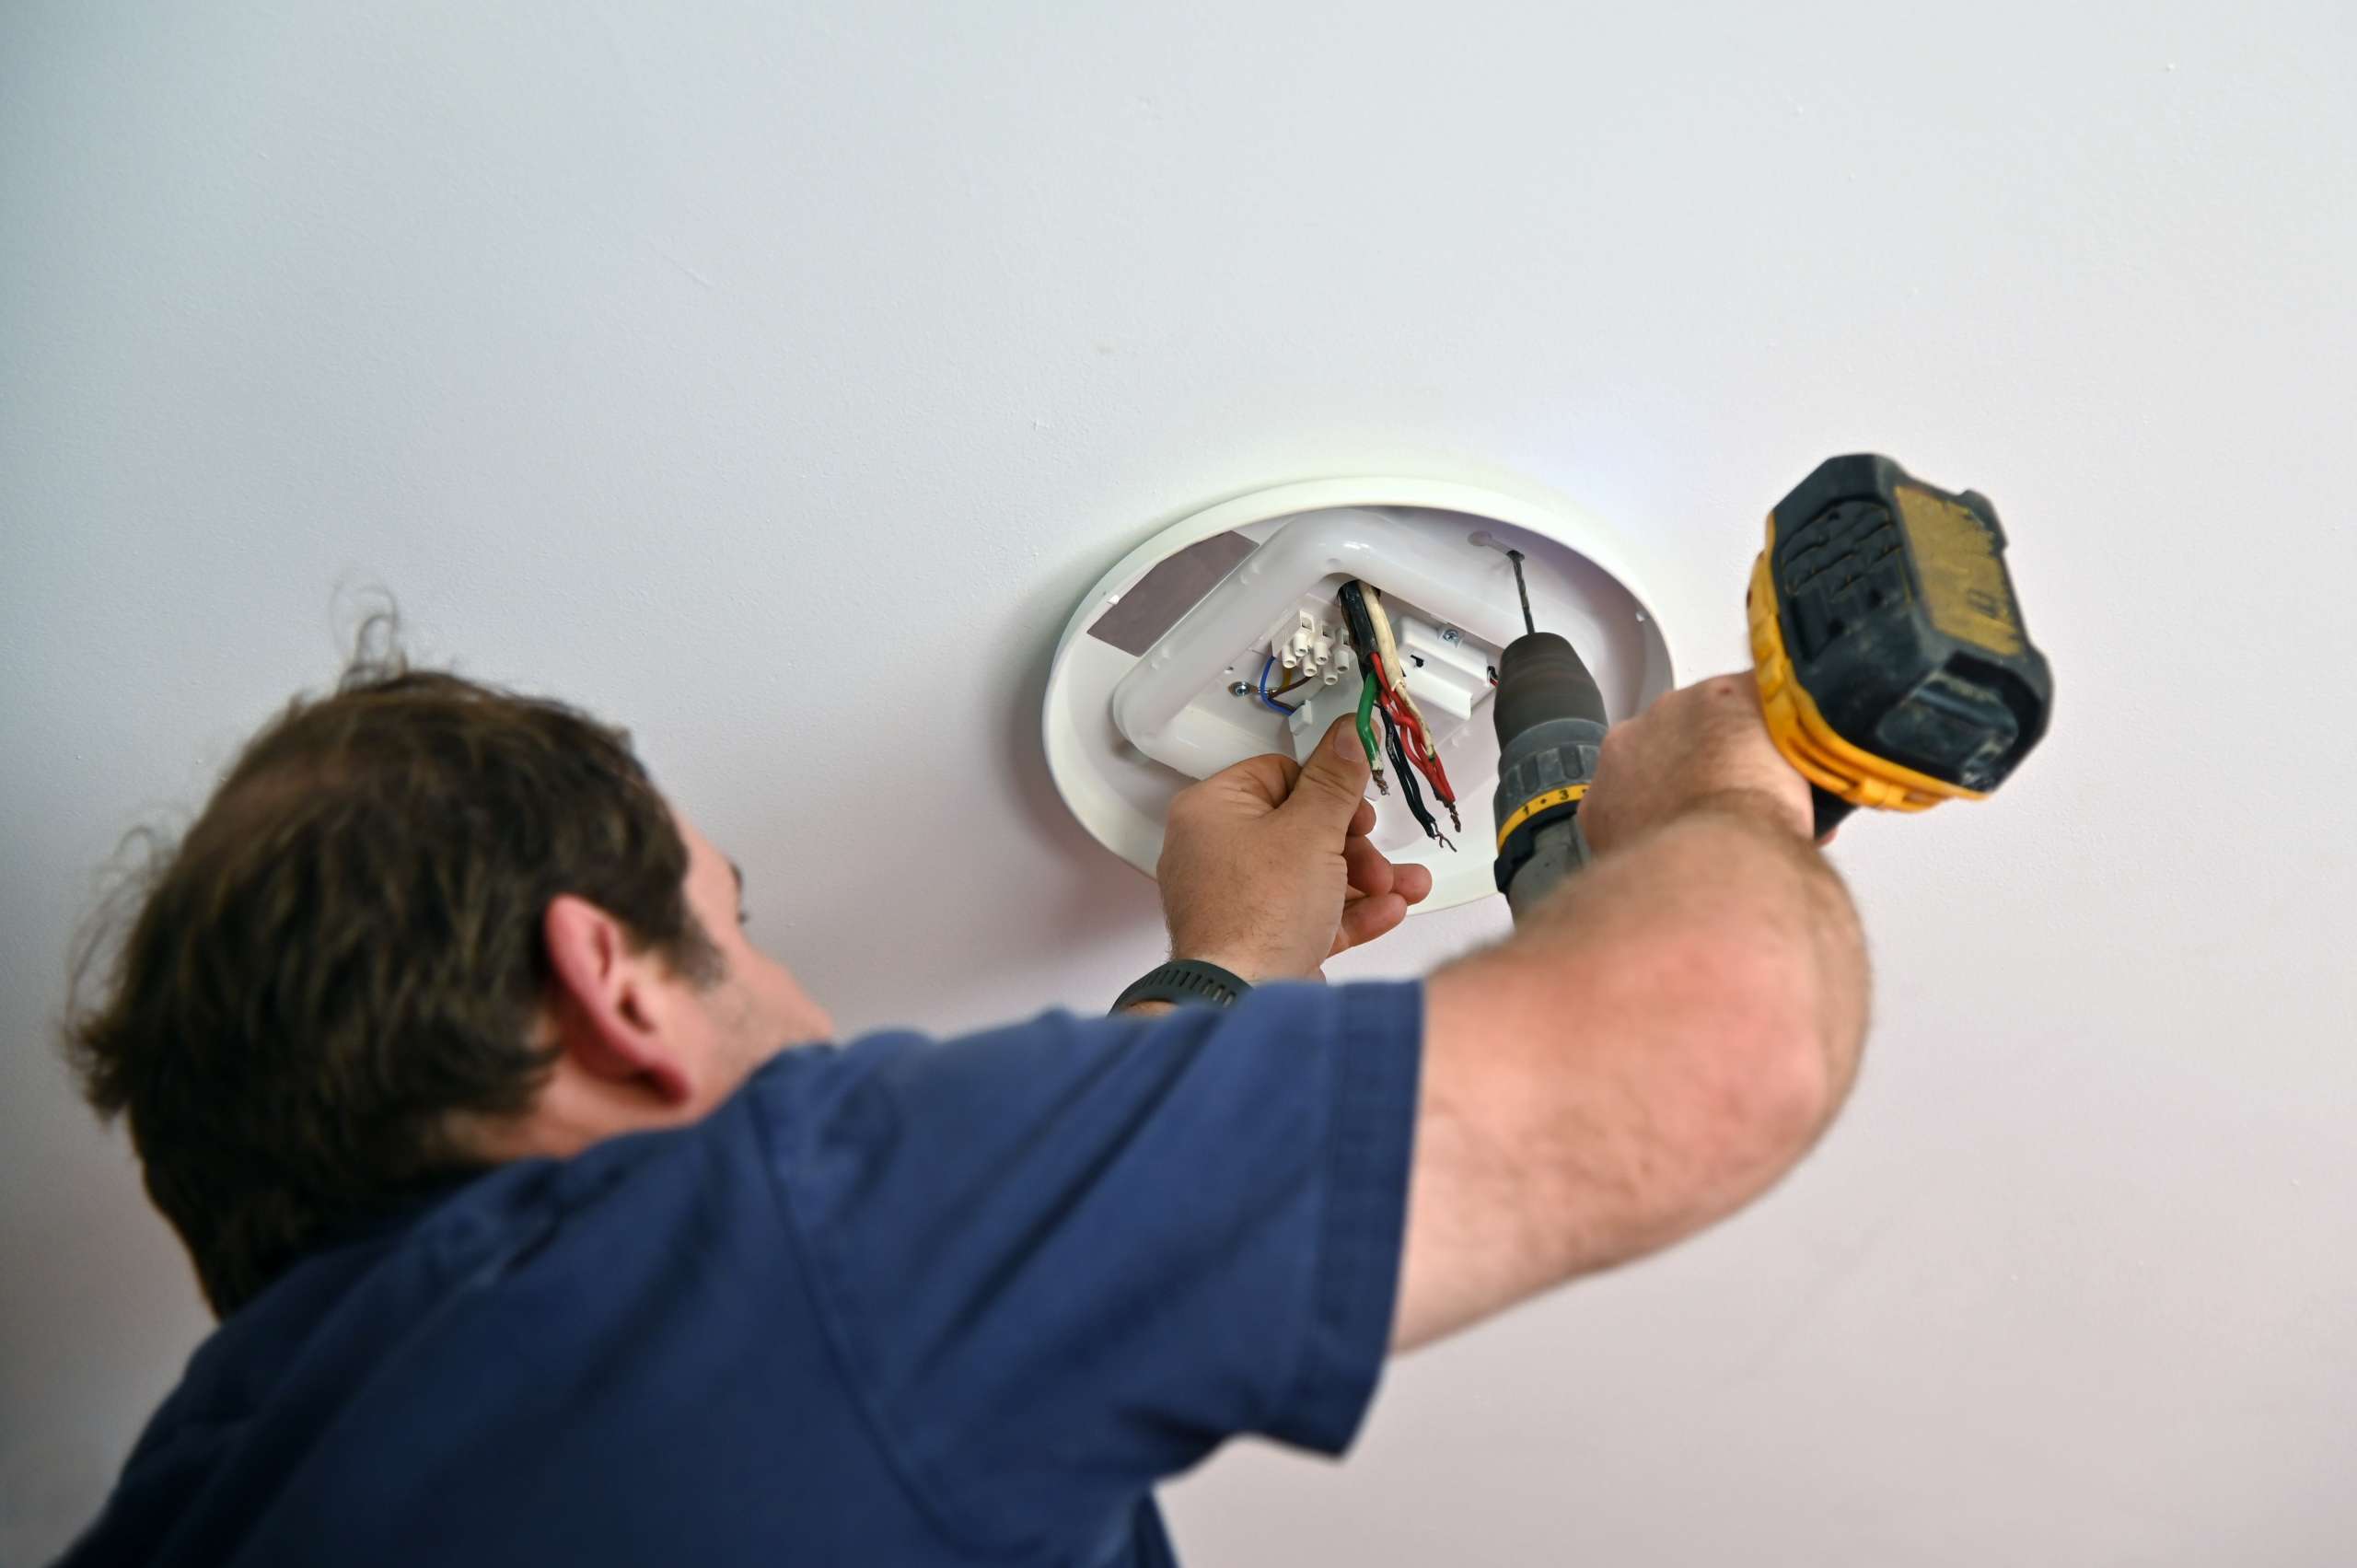 An electrician drilling on ceiling